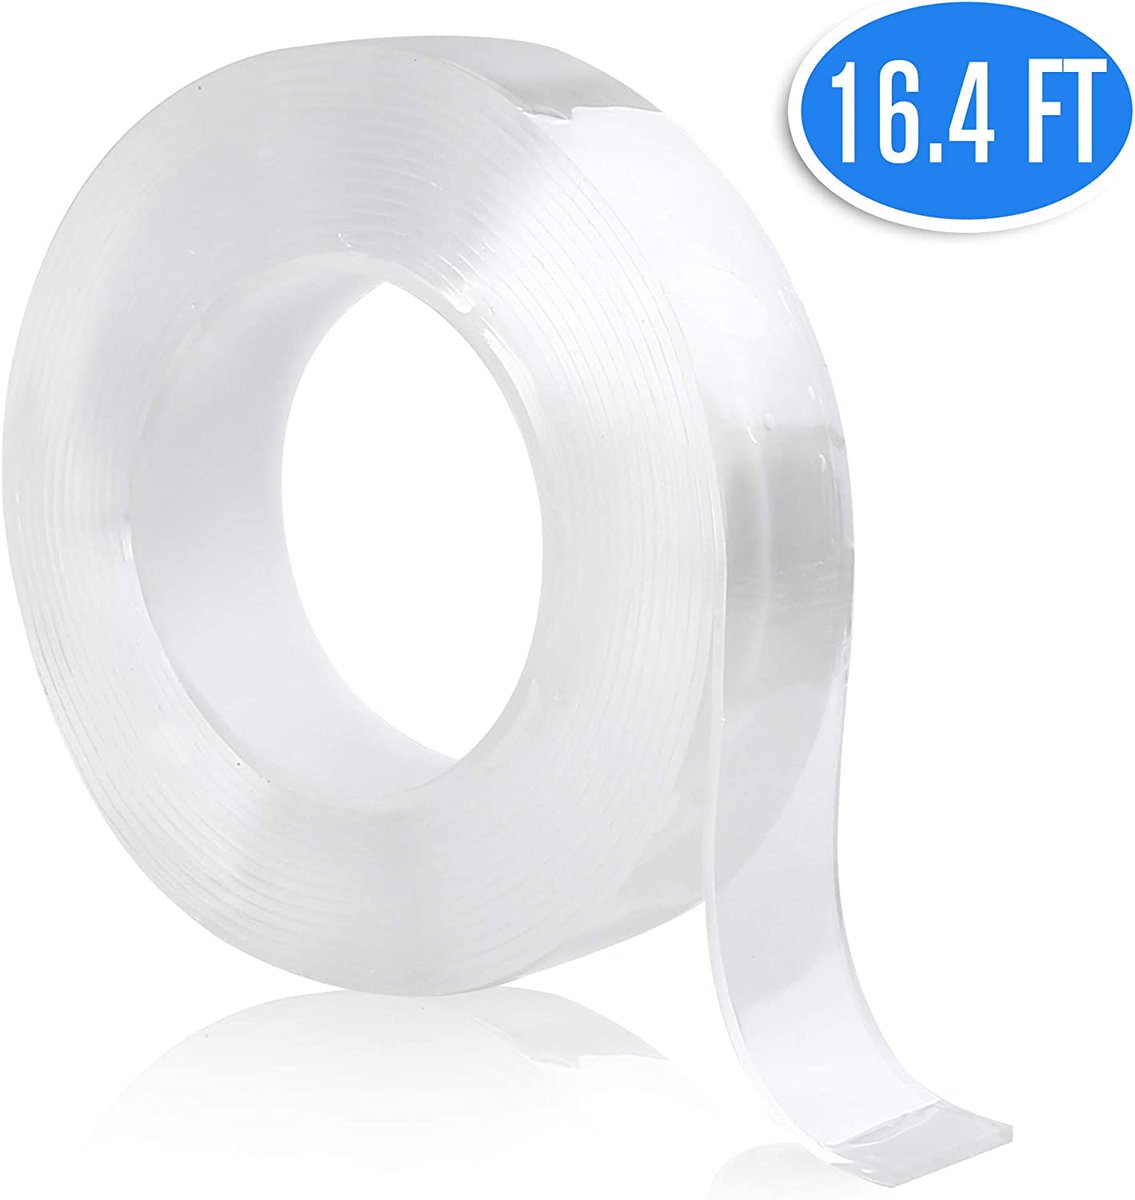 Hot sell double sided tape. Heavy duty one, can hold items up to 1KG!💪
Nice price💲 for the last a few🔥🔥
amazon.com/promocode/A1EJ…

#doublesidedtape #wallsticker #homeorganization #walldecor #adhesivetape #organizingtips #amazondeals #dealoftheday #couponcode #lotfancy